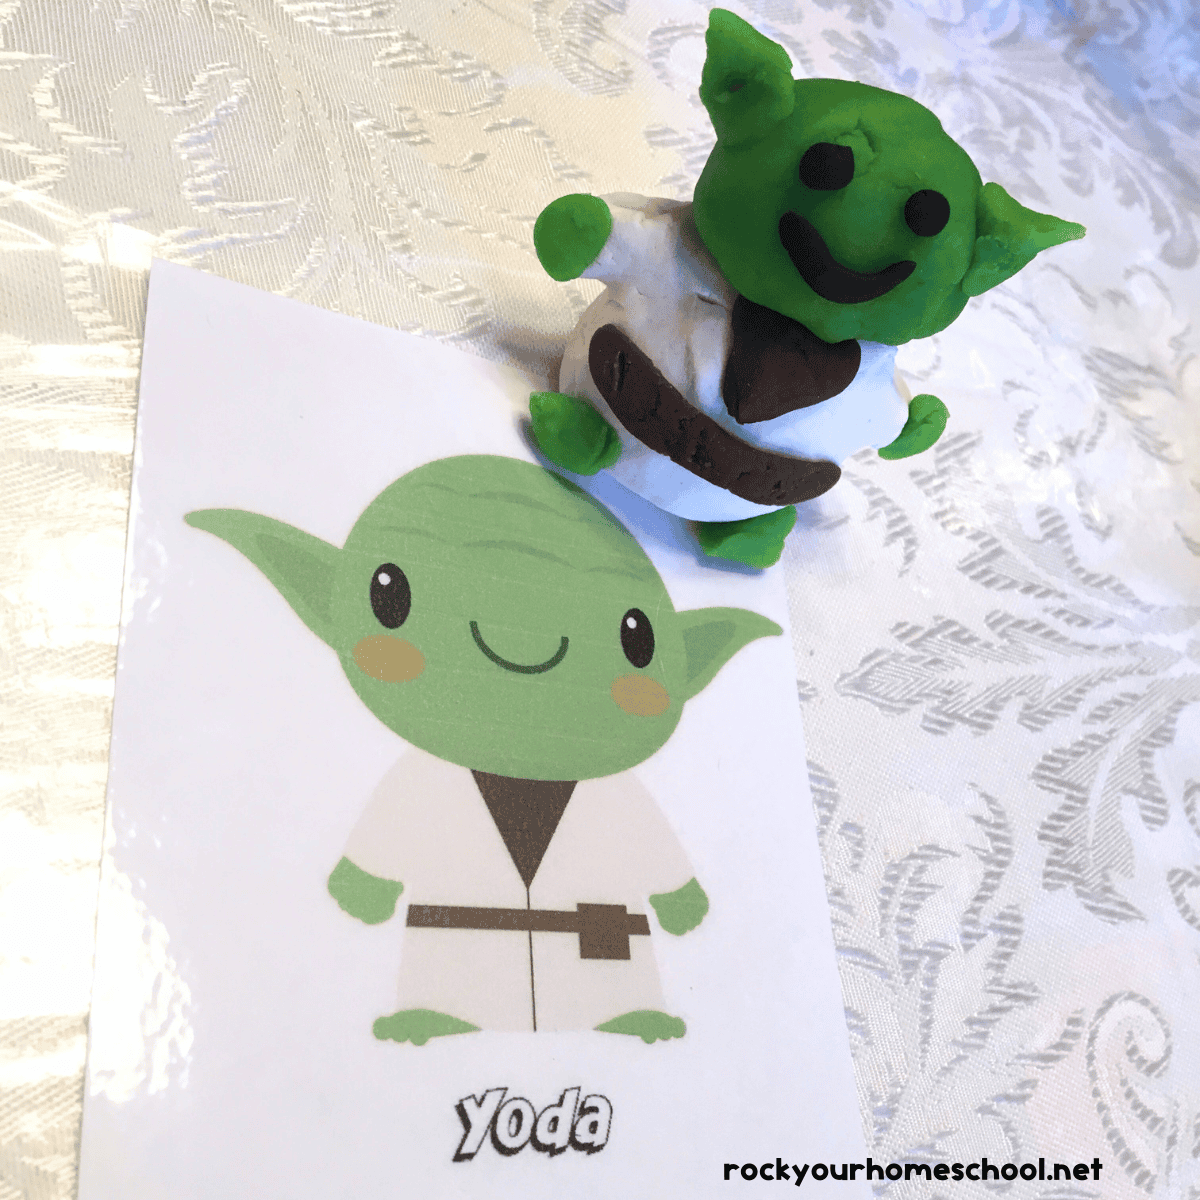 Example of free printable Star Wars cards for playdough fun with Yoda.